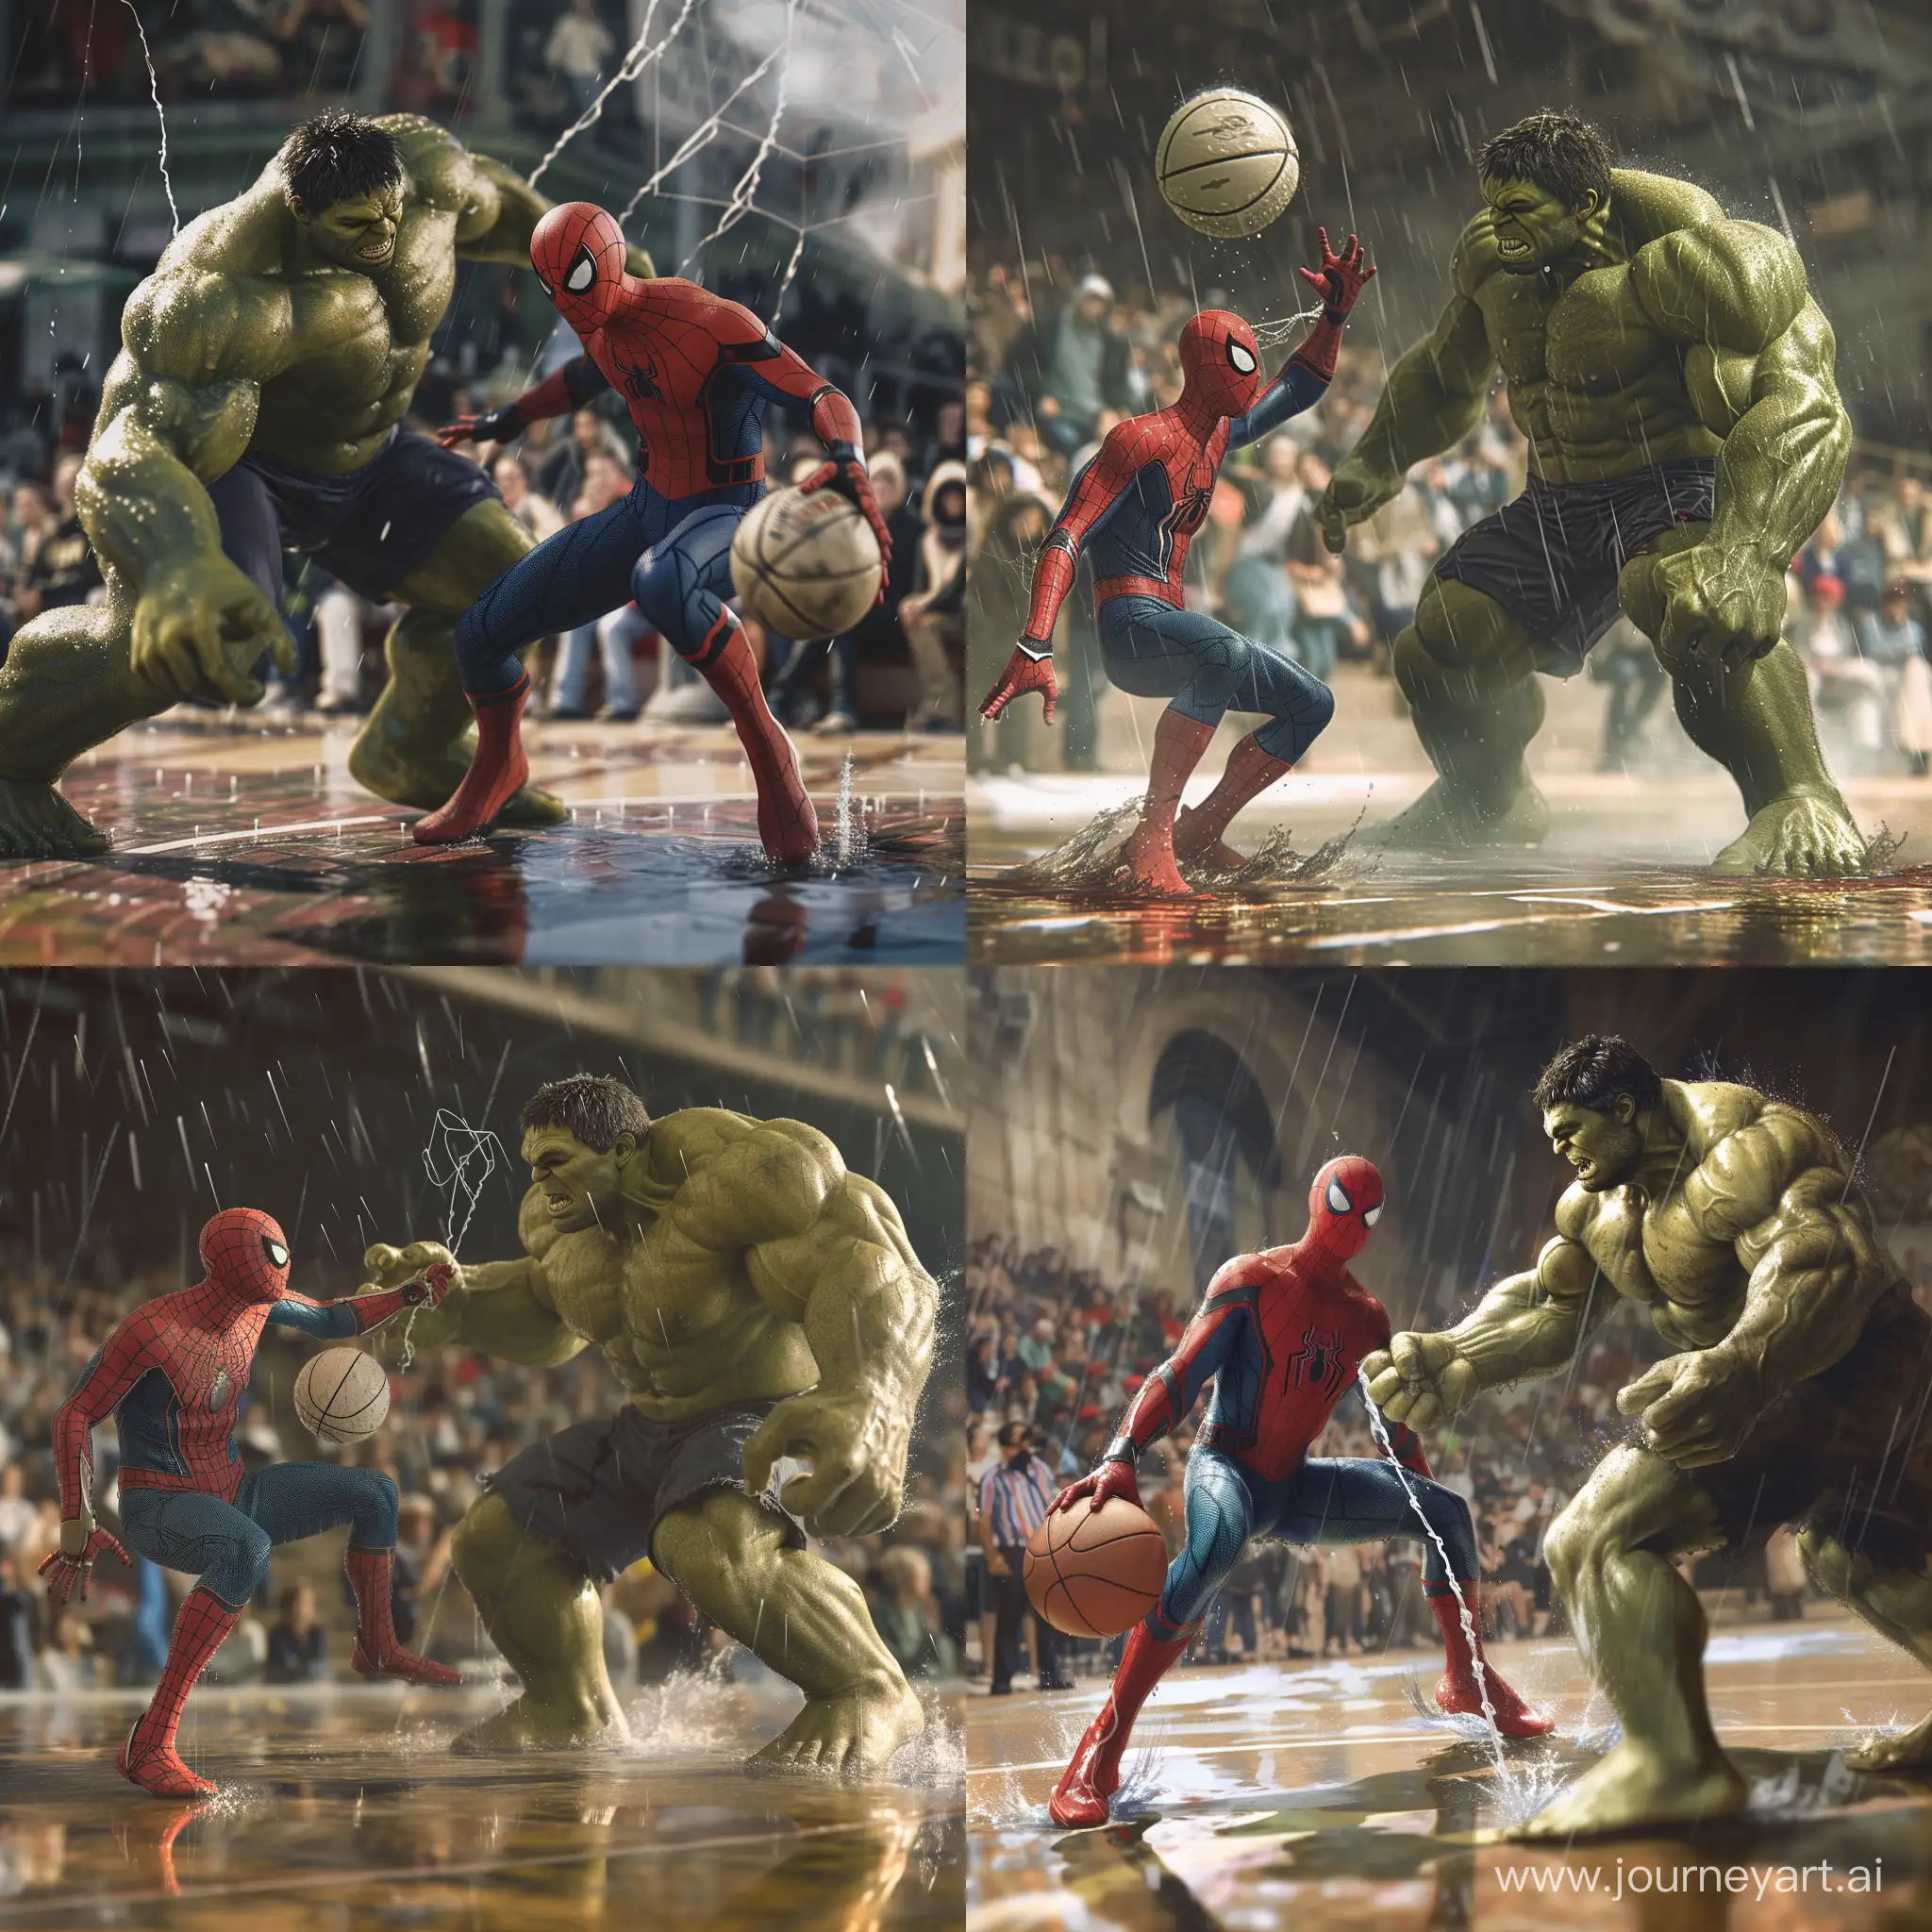 A realistic picture of Spider-Man and Hulk playing power ball in the rain, in front of an audience watching the match, with blur in the background, accuracy, focus, and very fine details on fabrics, skin, and skin.